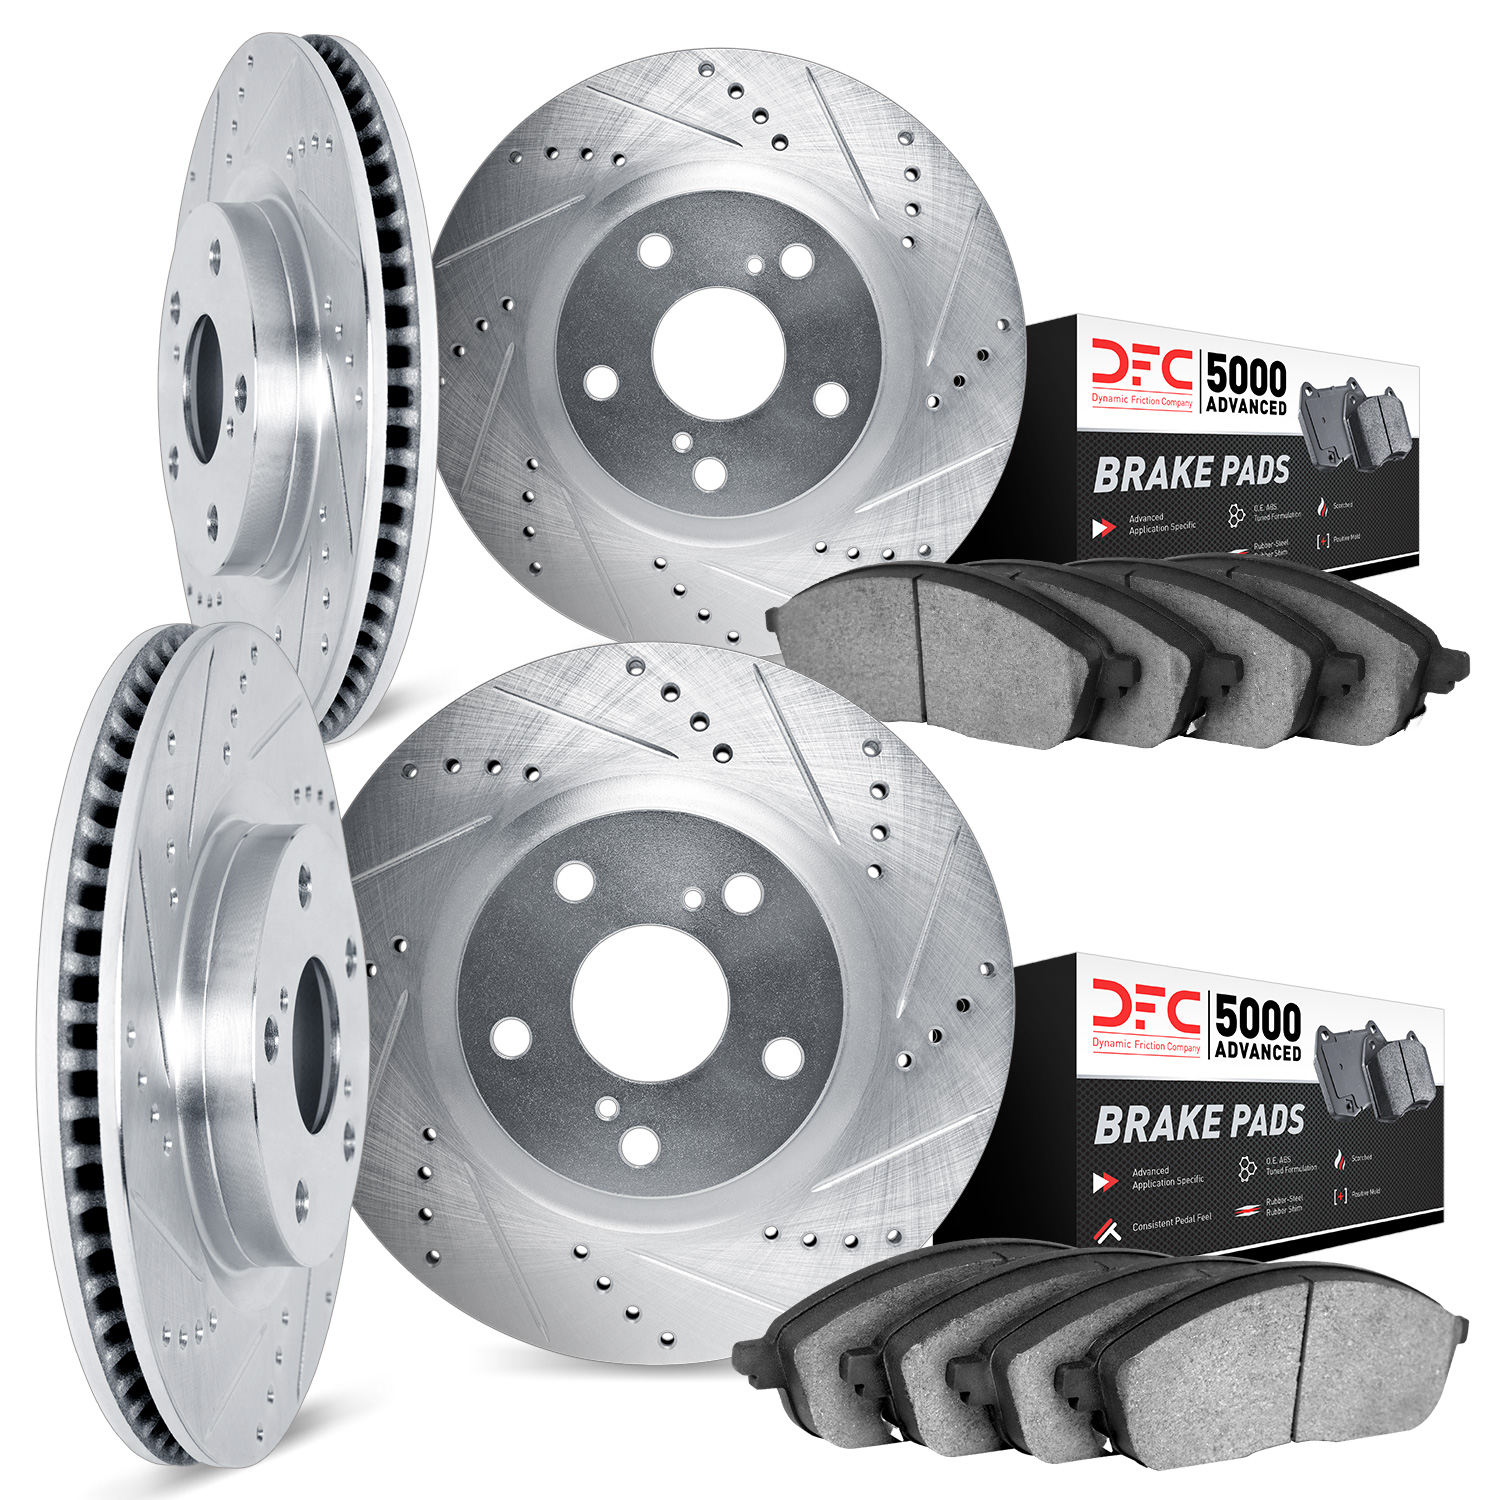 7504-11014 Drilled/Slotted Brake Rotors w/5000 Advanced Brake Pads Kit [Silver], 2006-2009 Land Rover, Position: Front and Rear